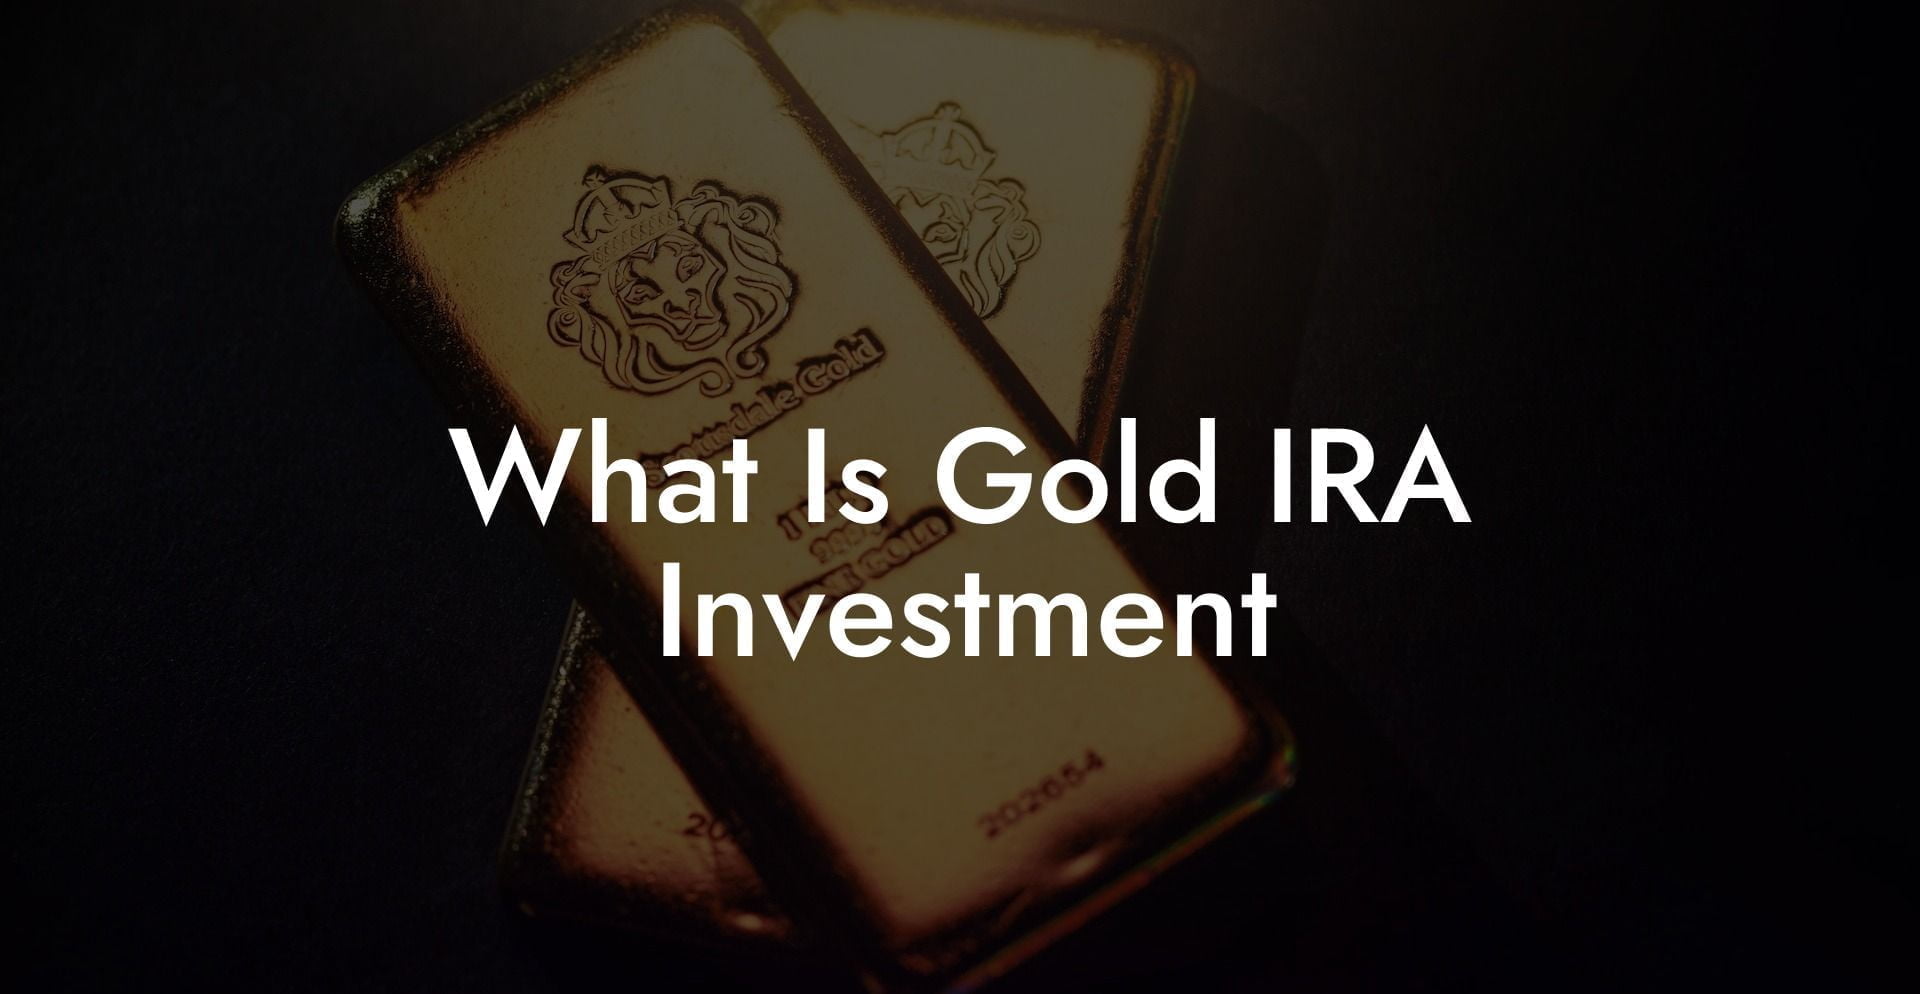 What Is Gold IRA Investment?